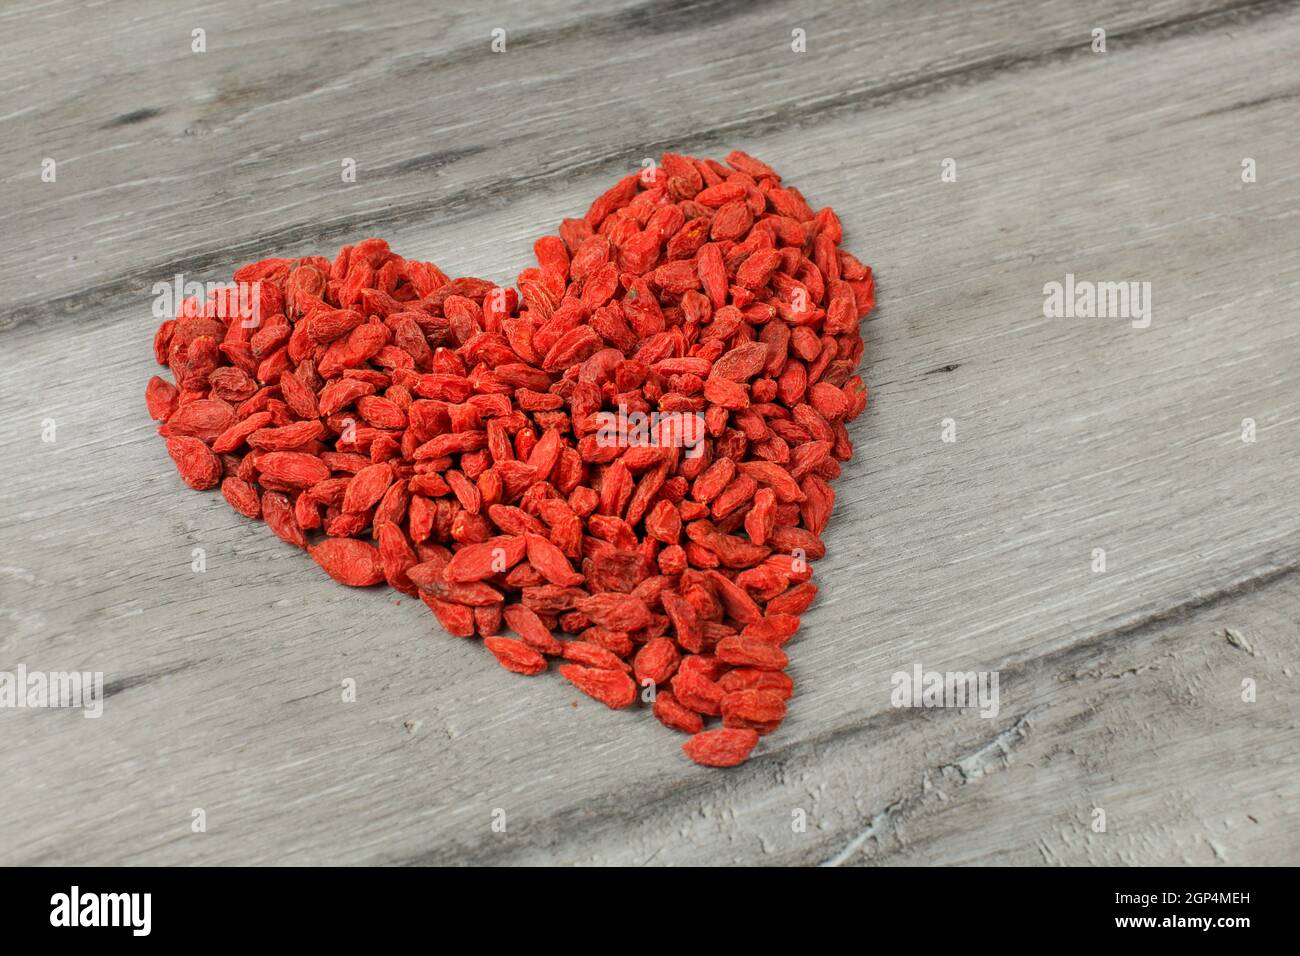 Heap of goji berry (wolfberry - Lycium chinense) dried fruits arranged in shape of heart on a gray wood table. Stock Photo